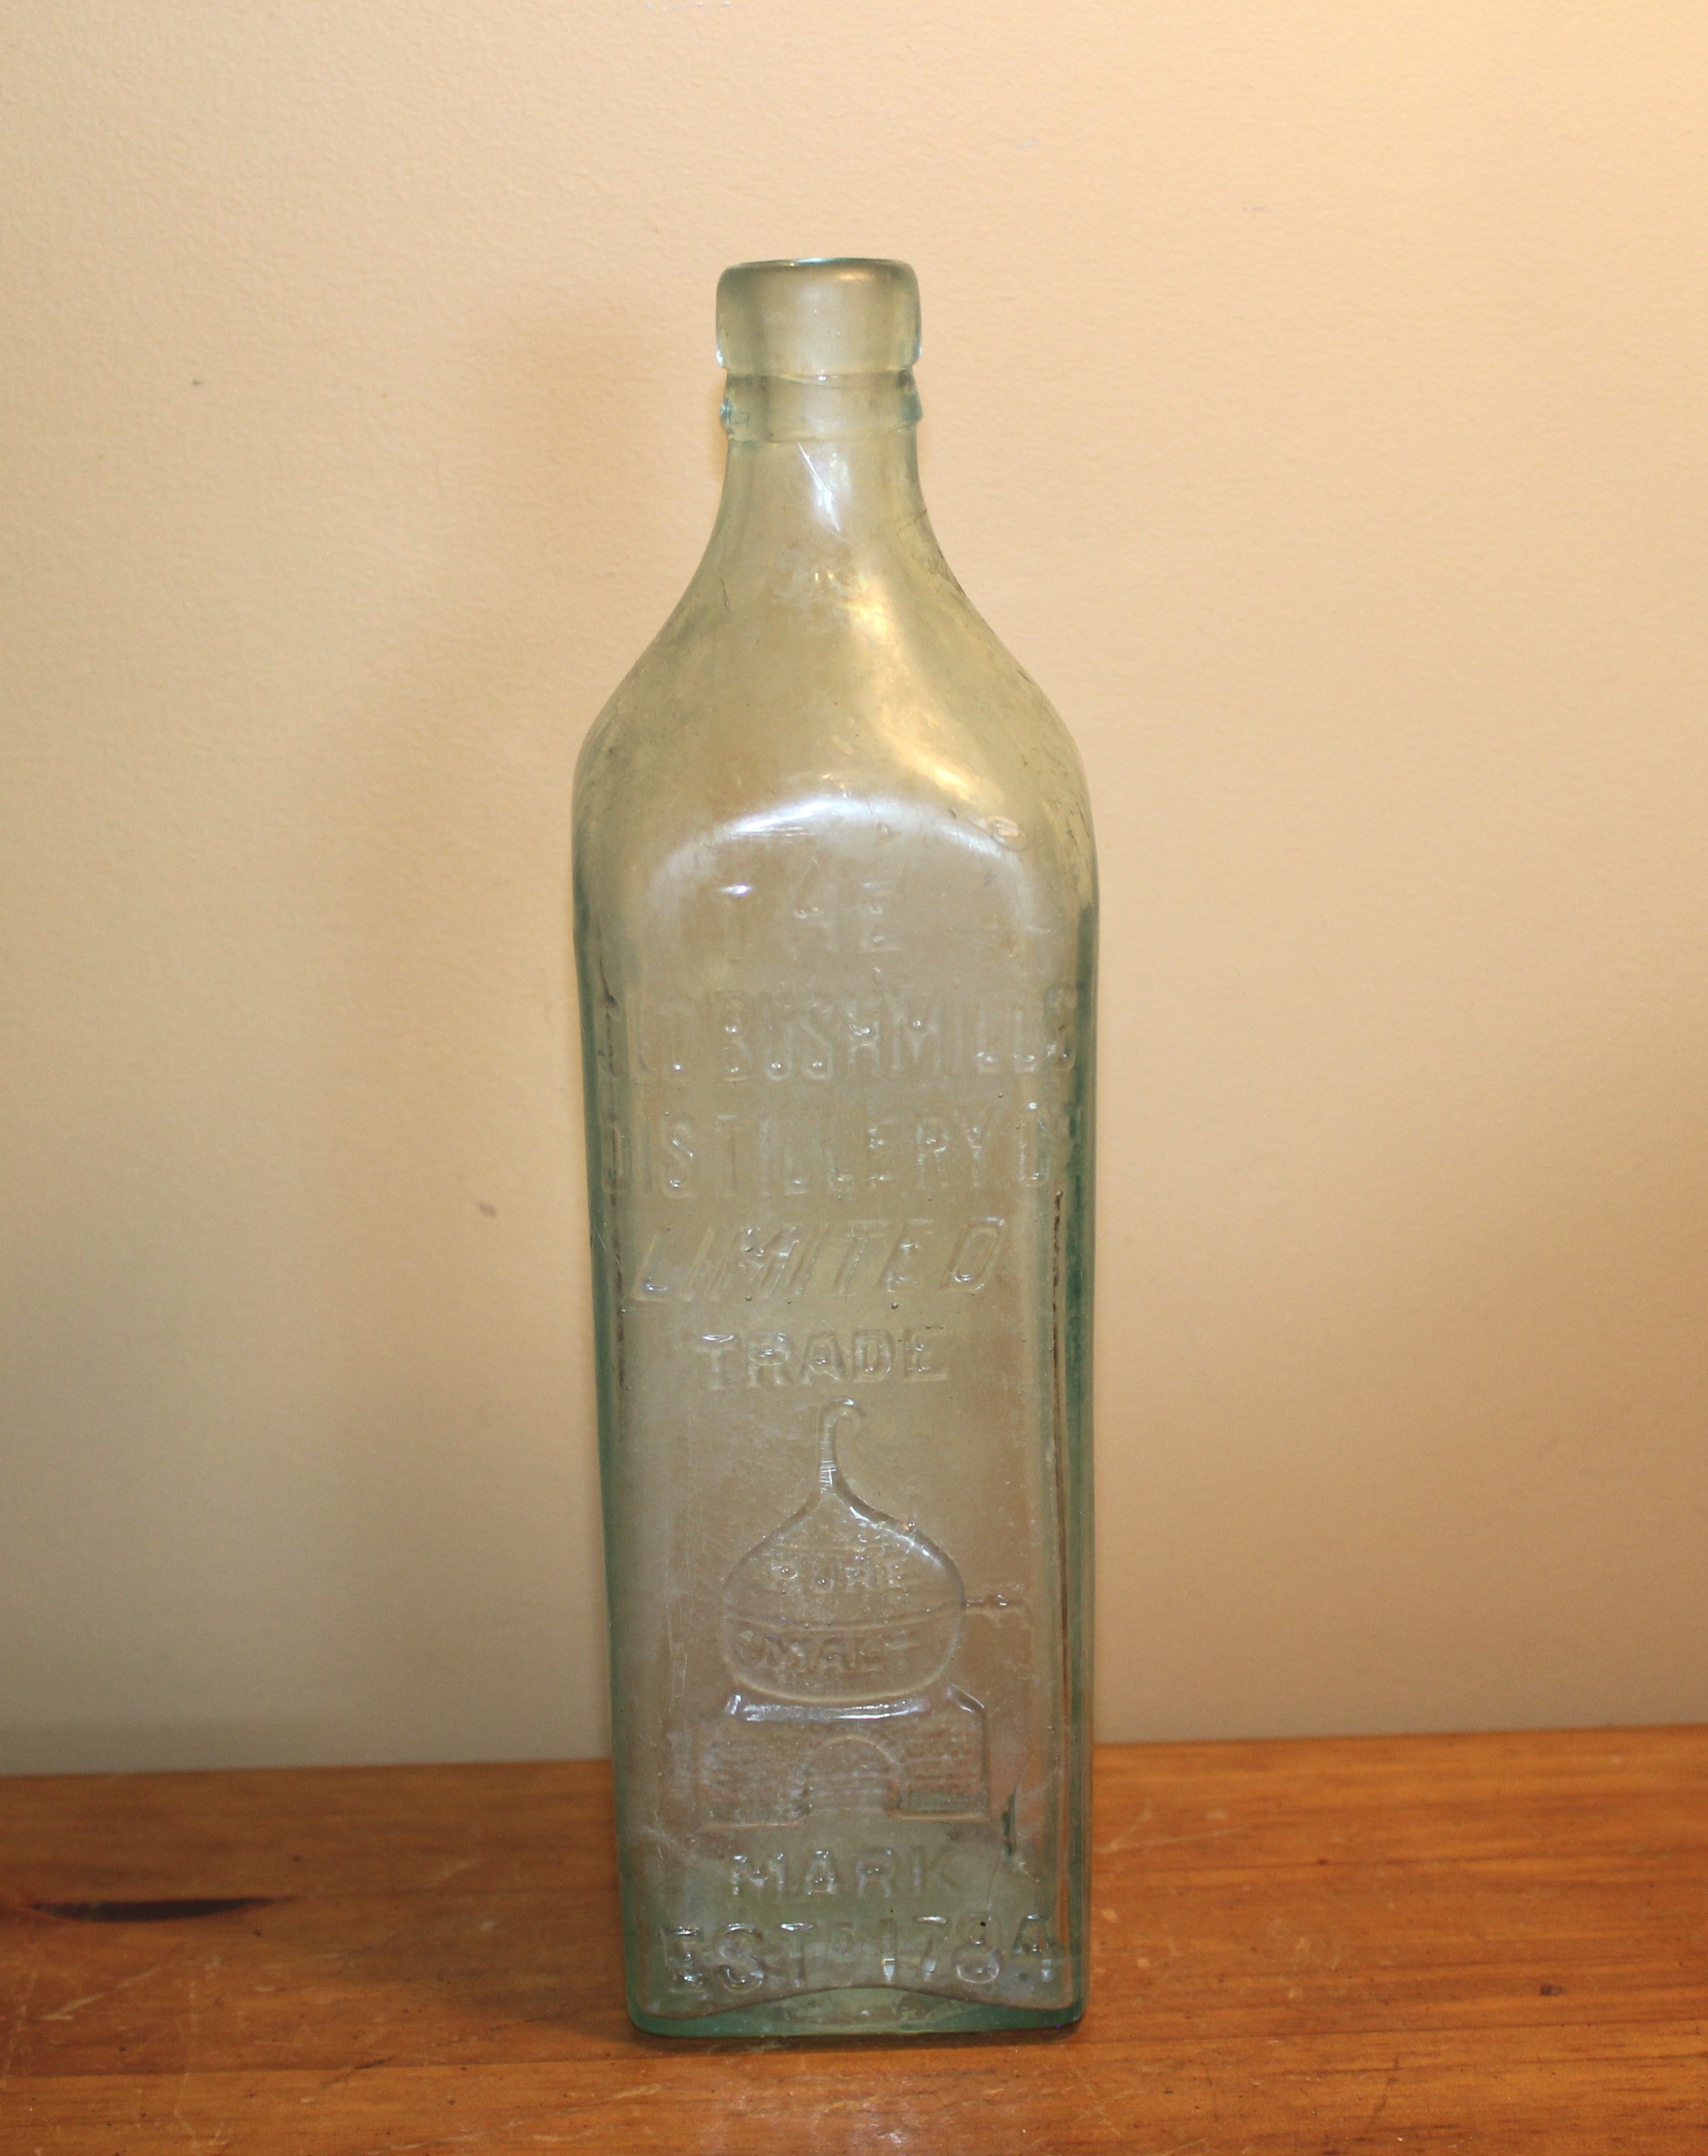 "The Old Bushmill's Distillery Co. Limited" Bottle